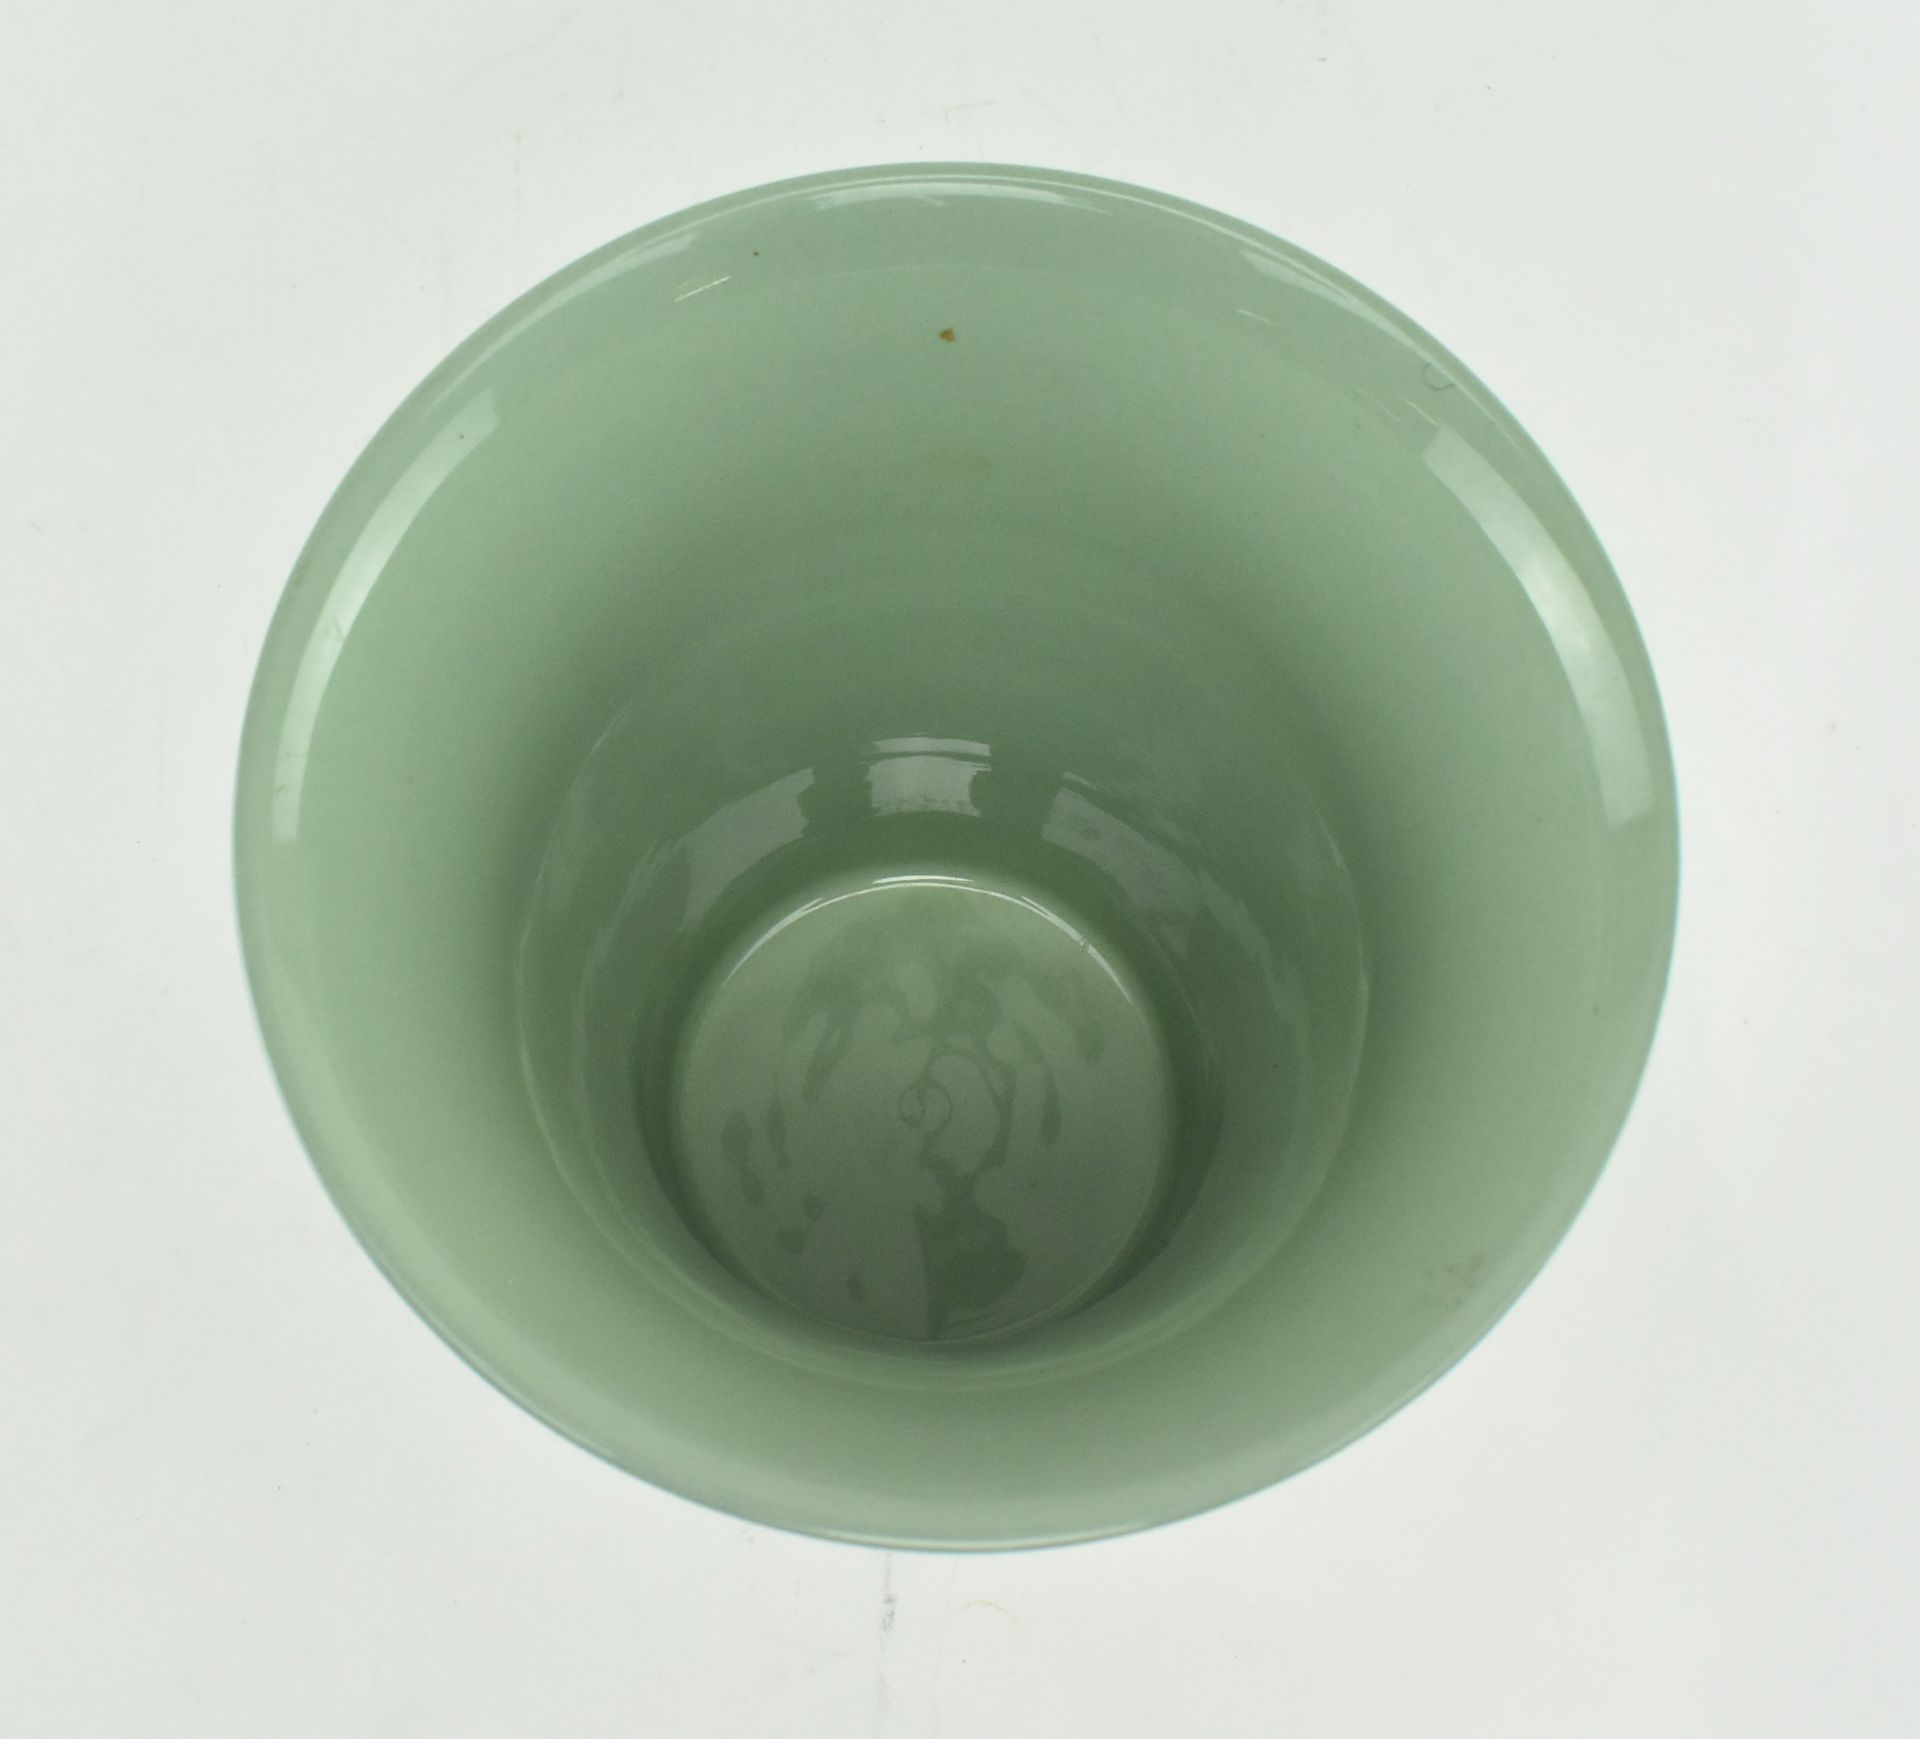 KEITH MURRAY FOR WEDGWOOD - CERAMIC CAMPANA URN IN SAGE - Image 4 of 6